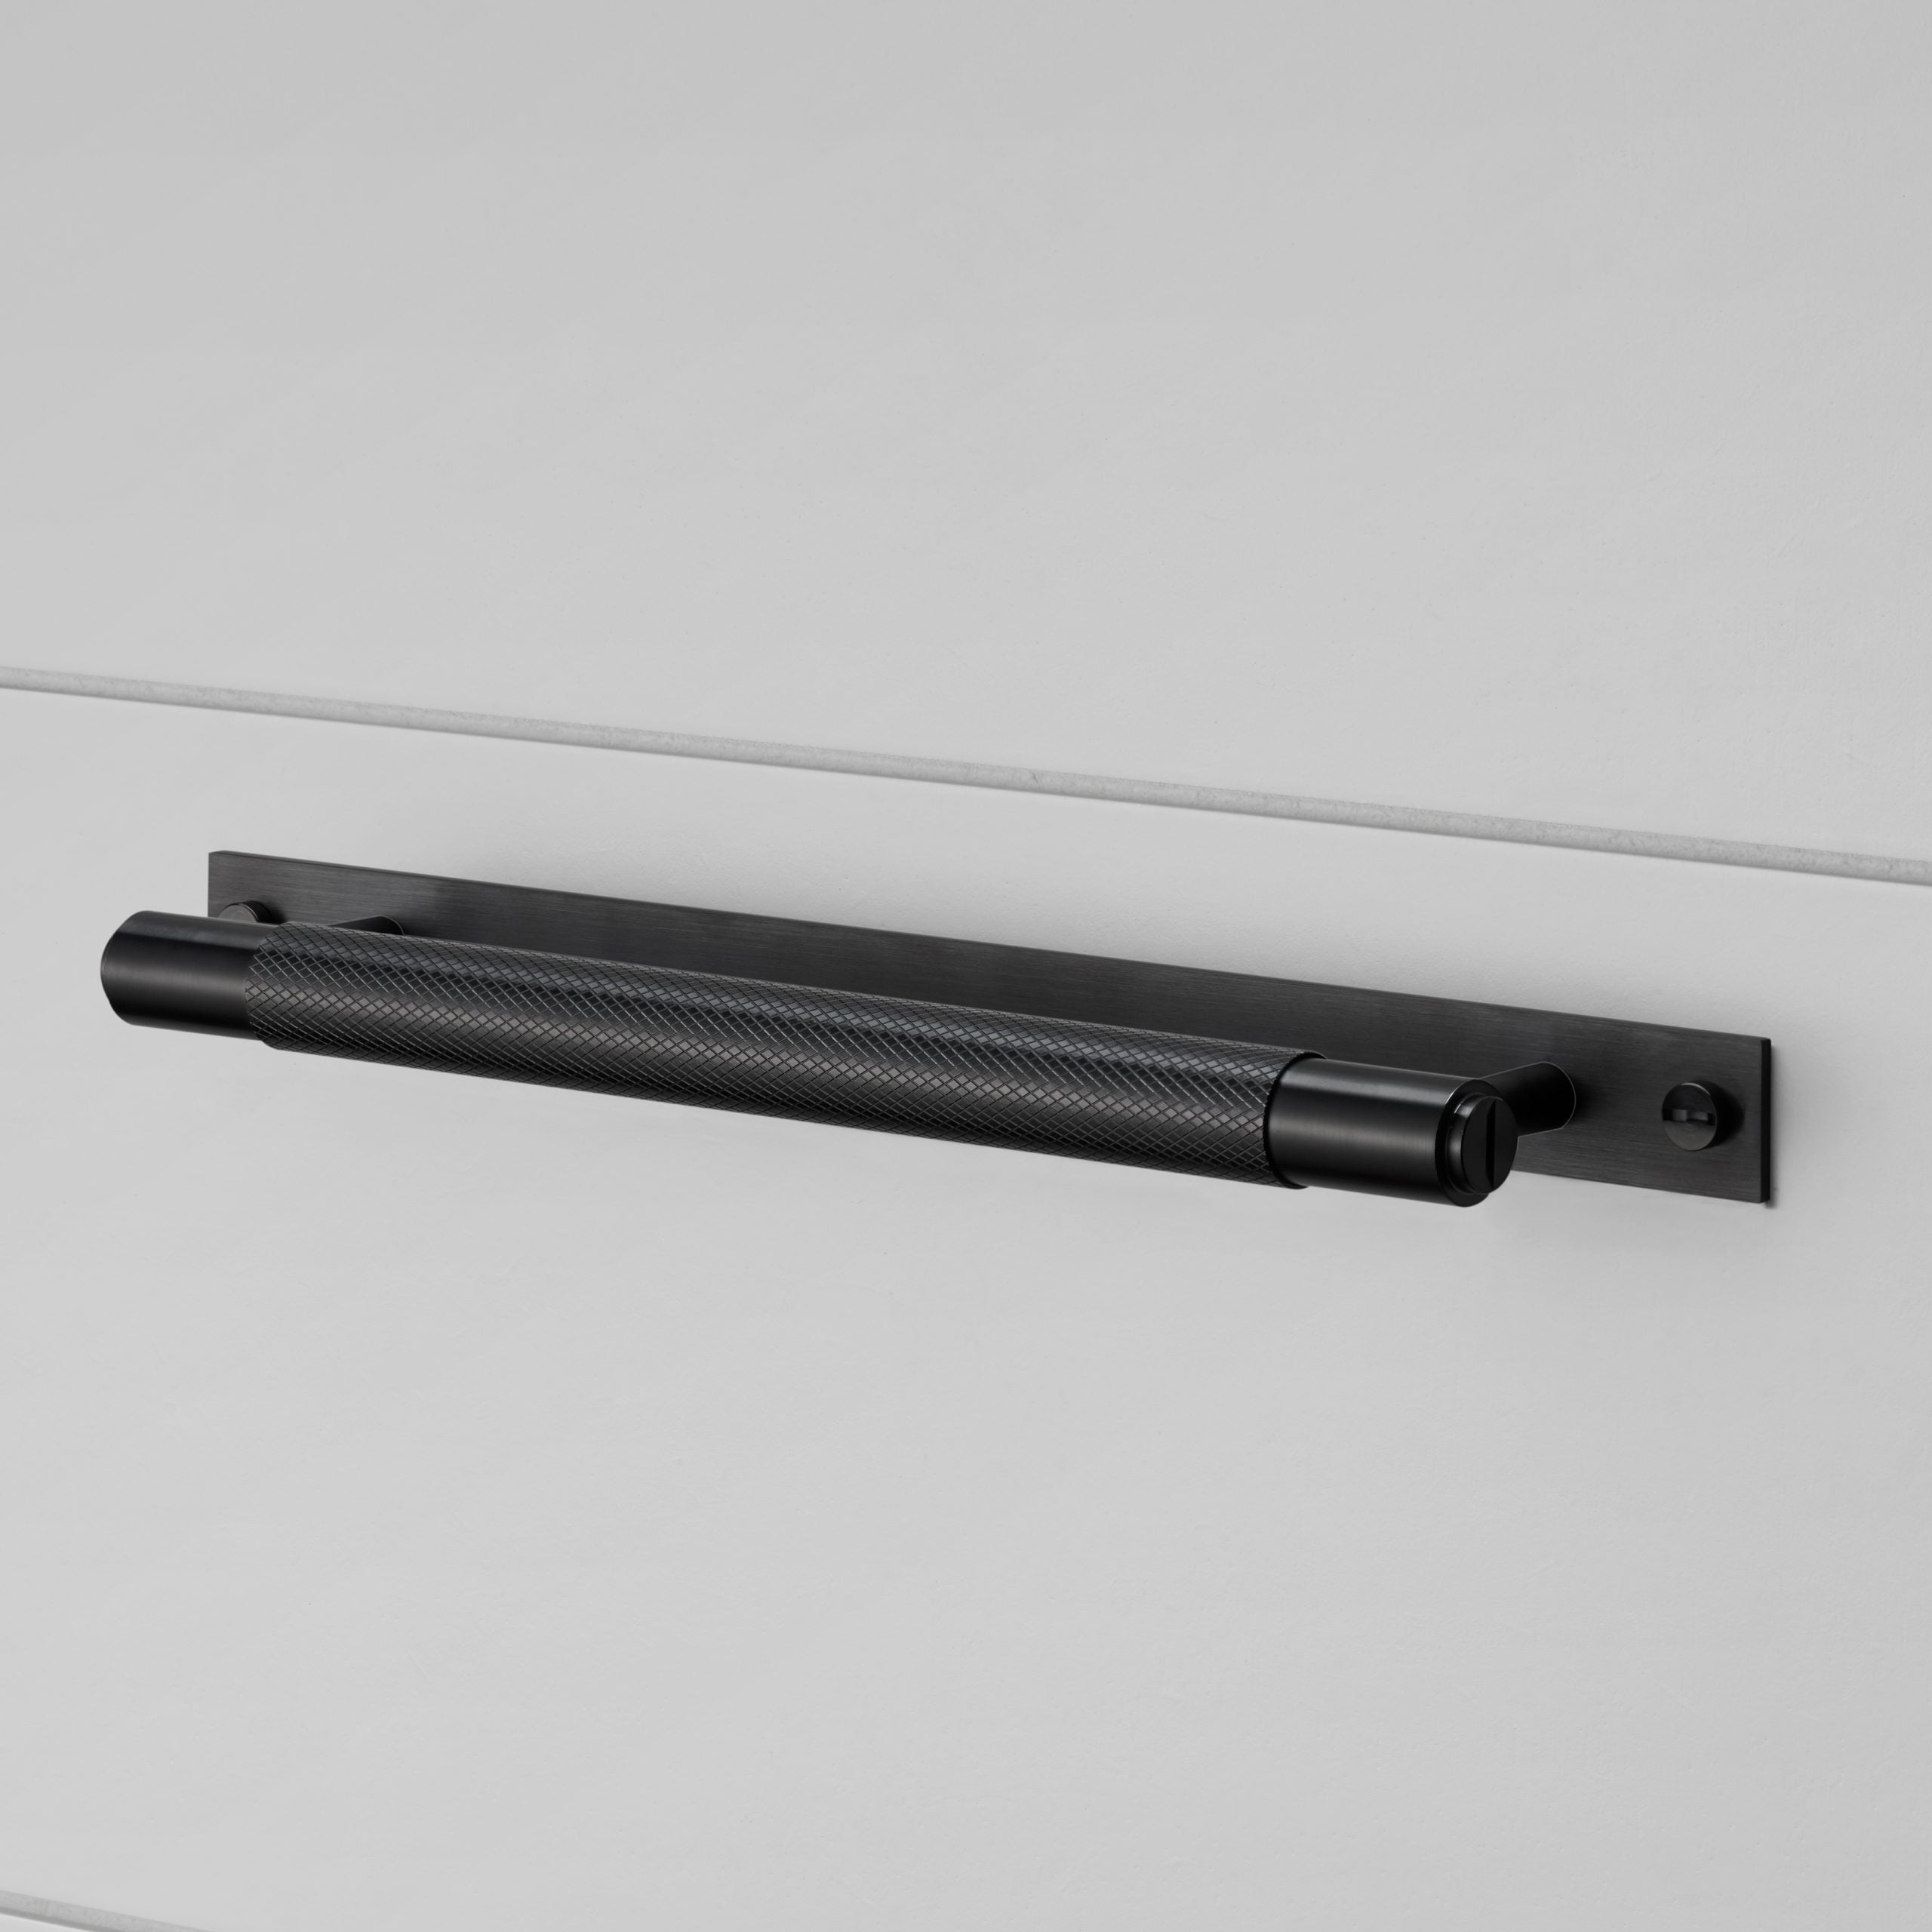 Buster + Punch Pull Bar, Linear Design Hardware Buster + Punch Black 0.3x0.09x0.03 